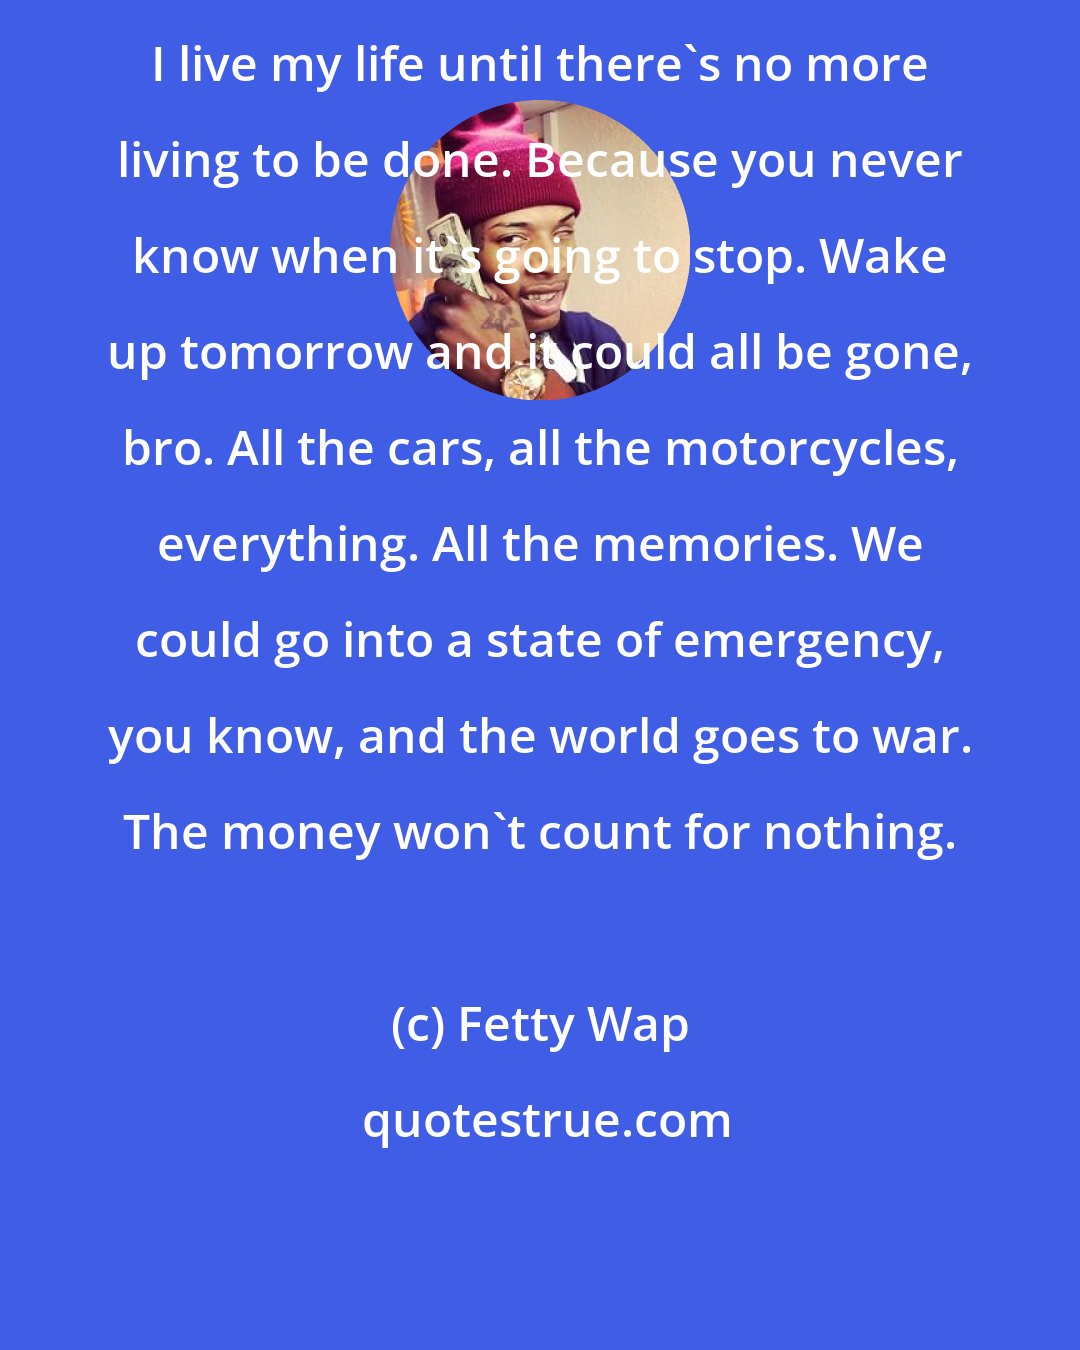 Fetty Wap: I live my life until there's no more living to be done. Because you never know when it's going to stop. Wake up tomorrow and it could all be gone, bro. All the cars, all the motorcycles, everything. All the memories. We could go into a state of emergency, you know, and the world goes to war. The money won't count for nothing.